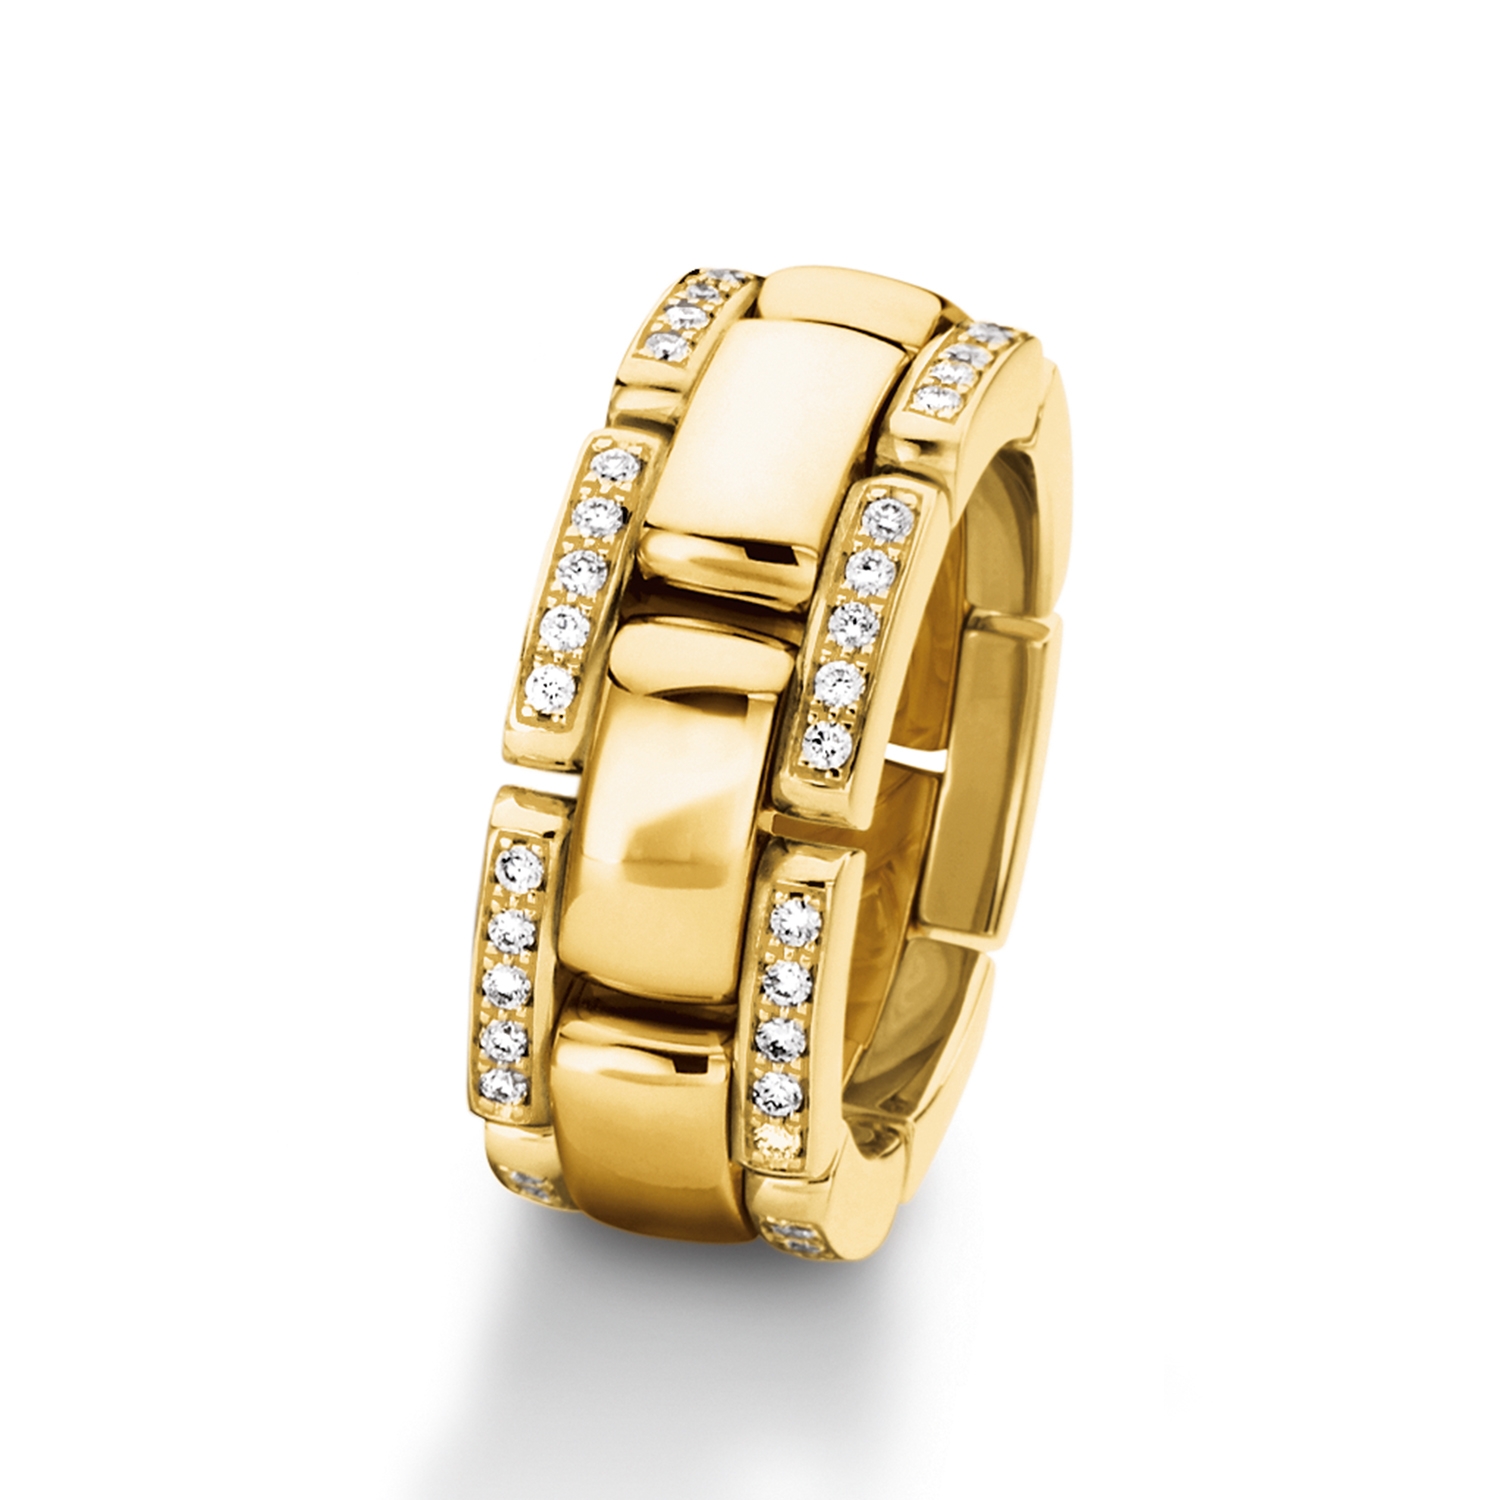 chain rings by Furrer Jacot in gold